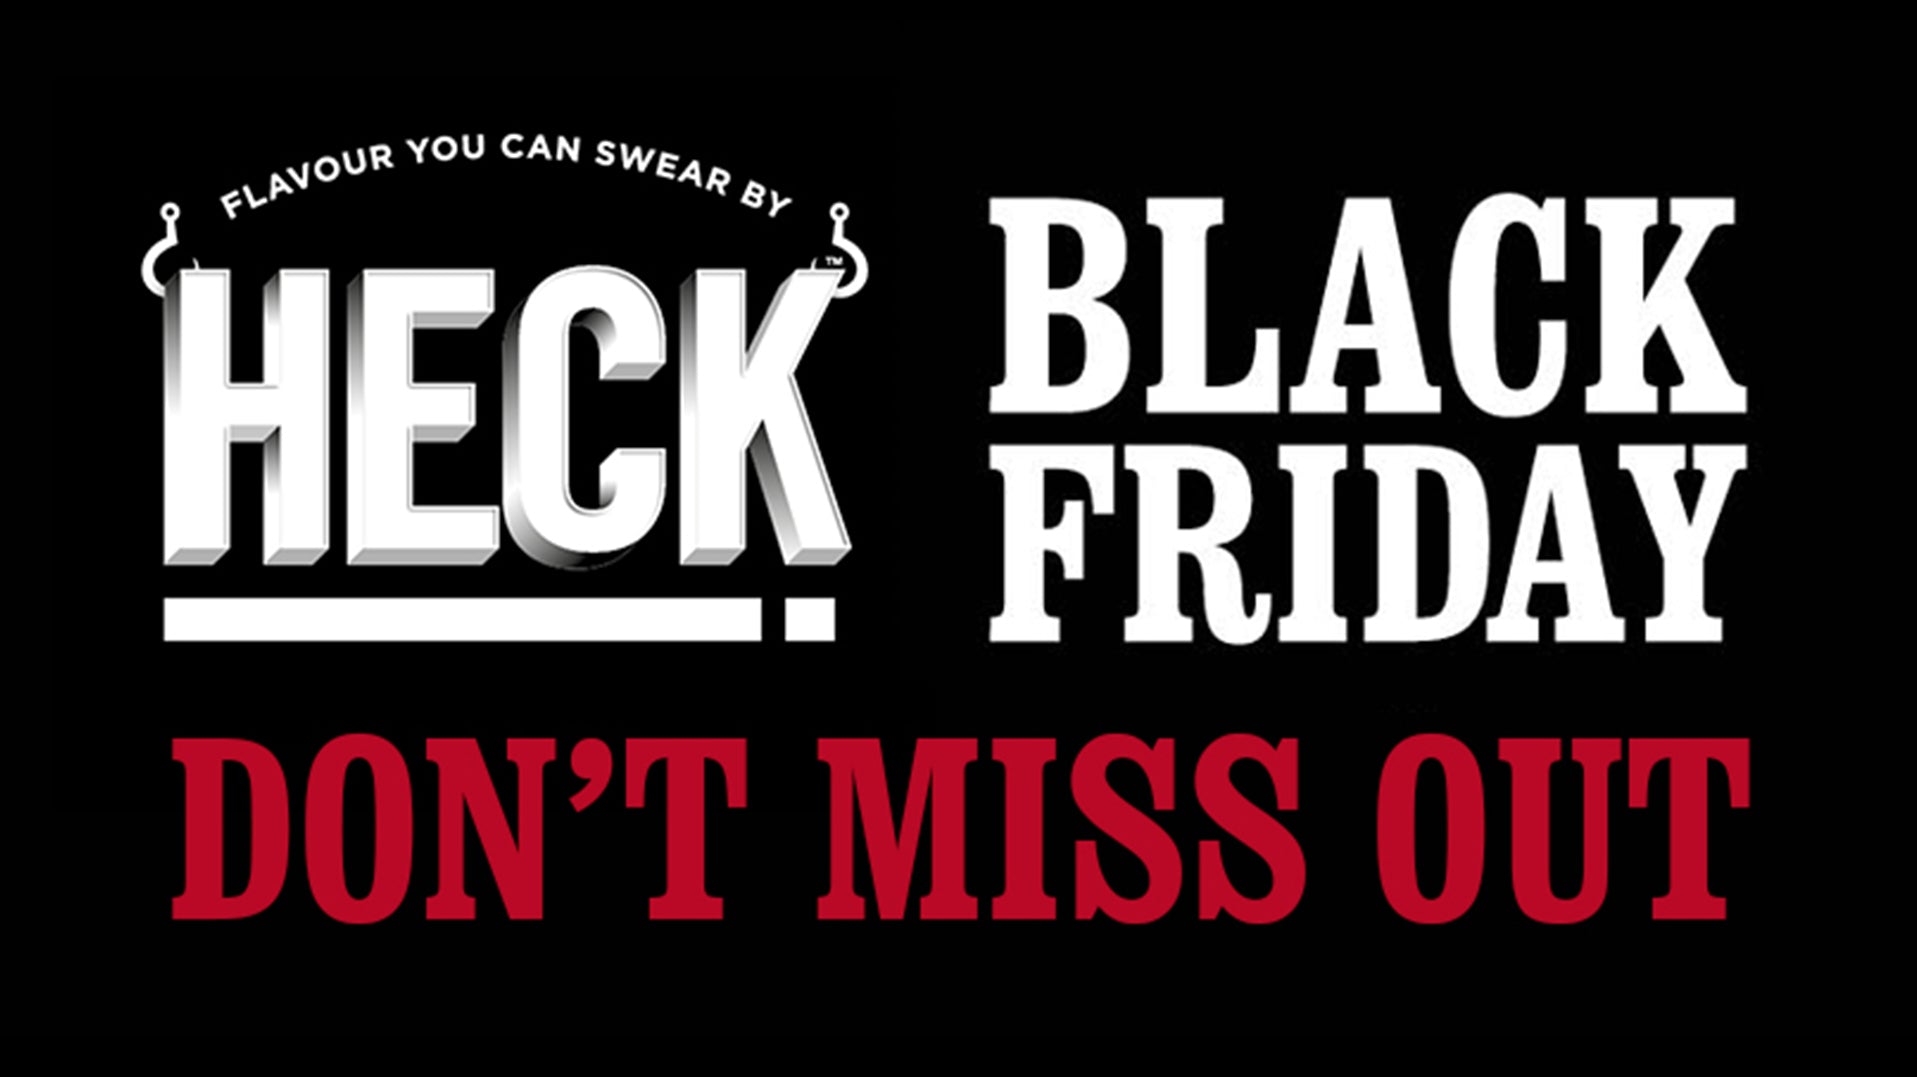 Don’t Miss The HECK Black Friday Sale